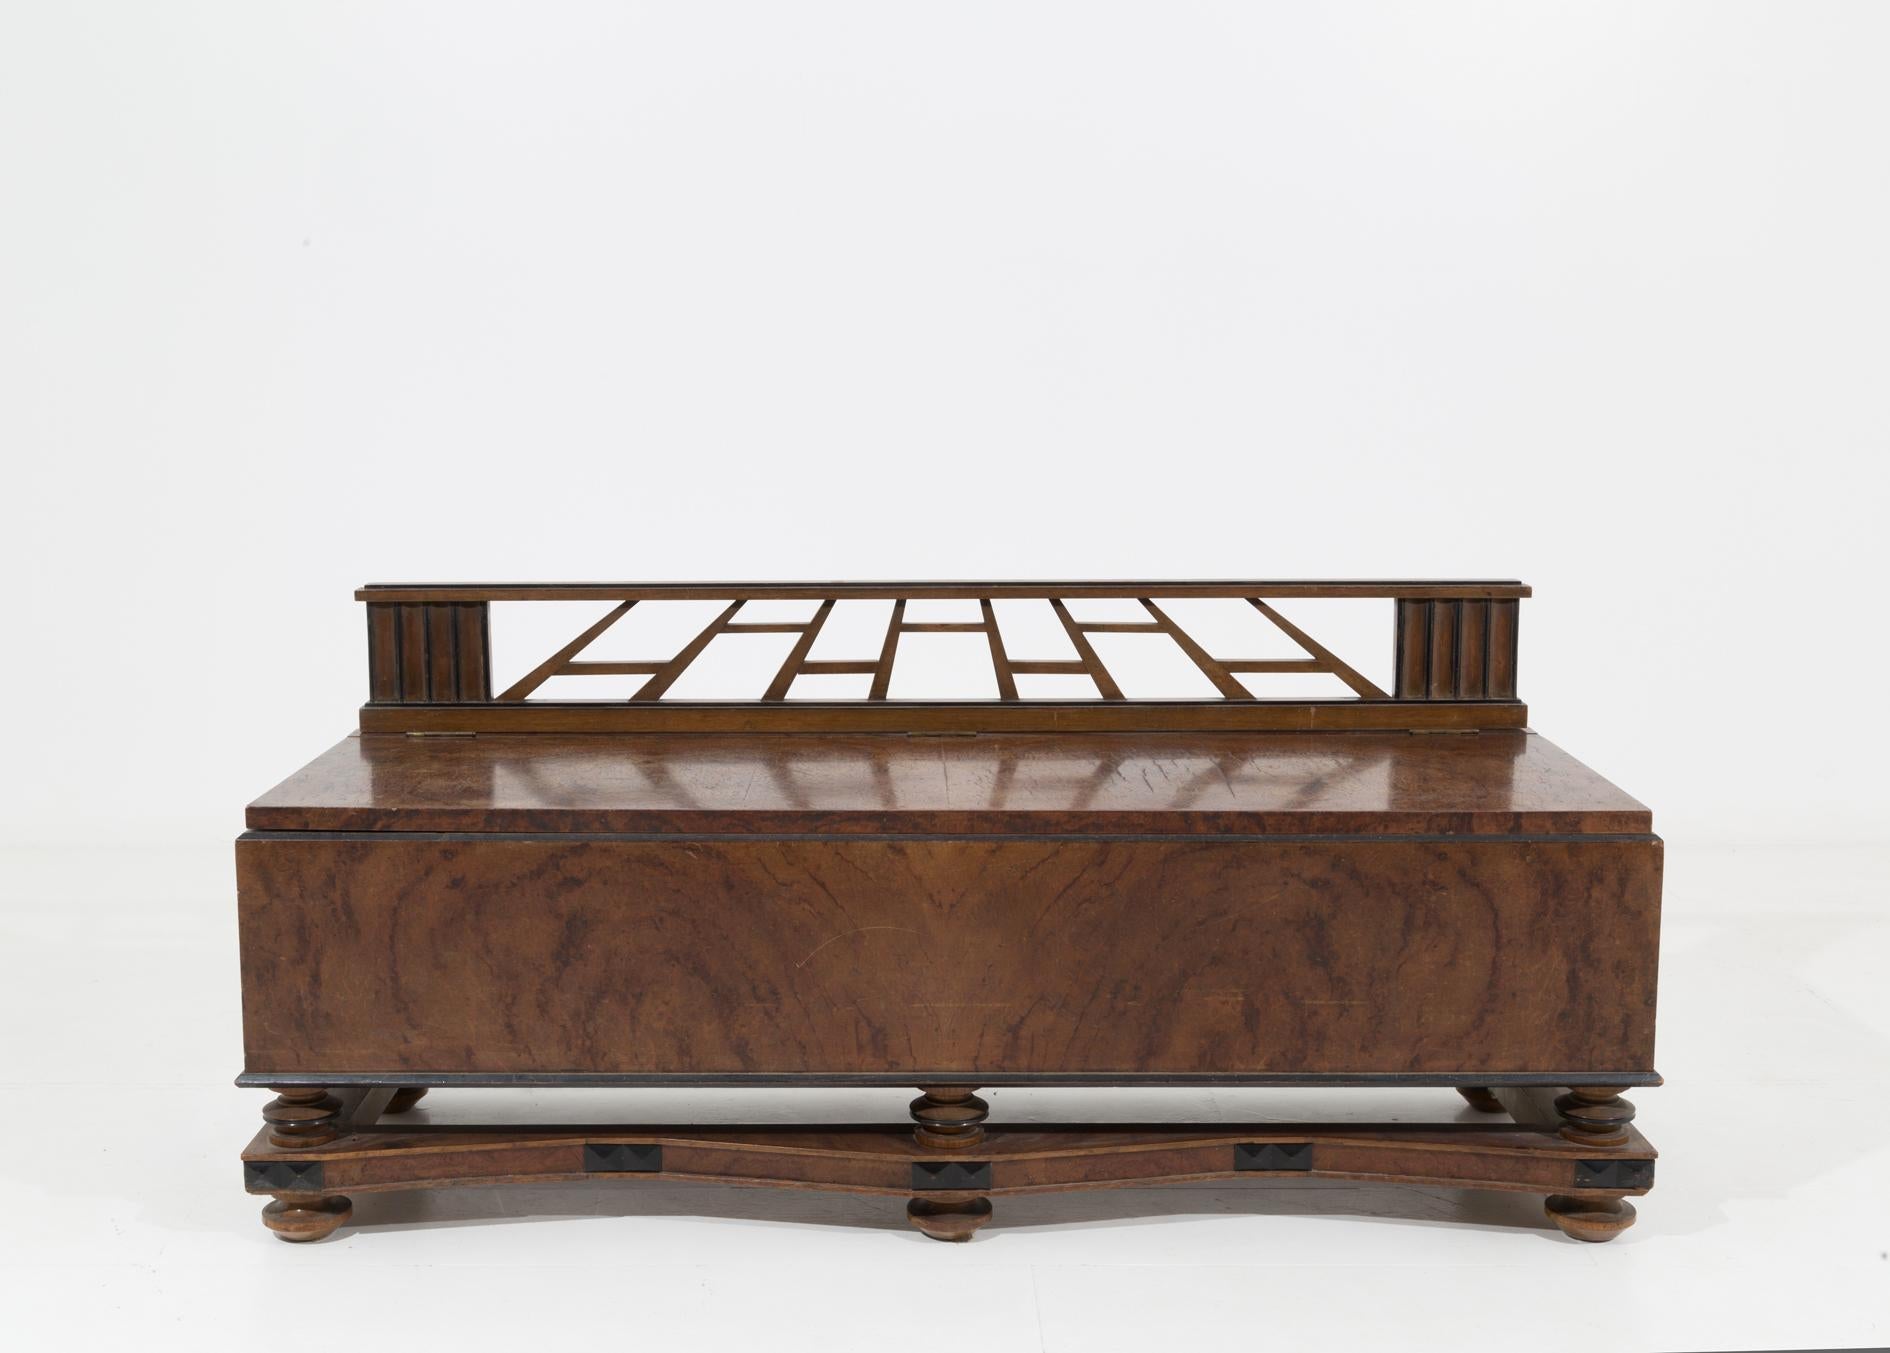 Mid-20th Century Sculptural Bench Art Deco Attributed to Gio Ponti in Walnut Burl, circa 1930s For Sale